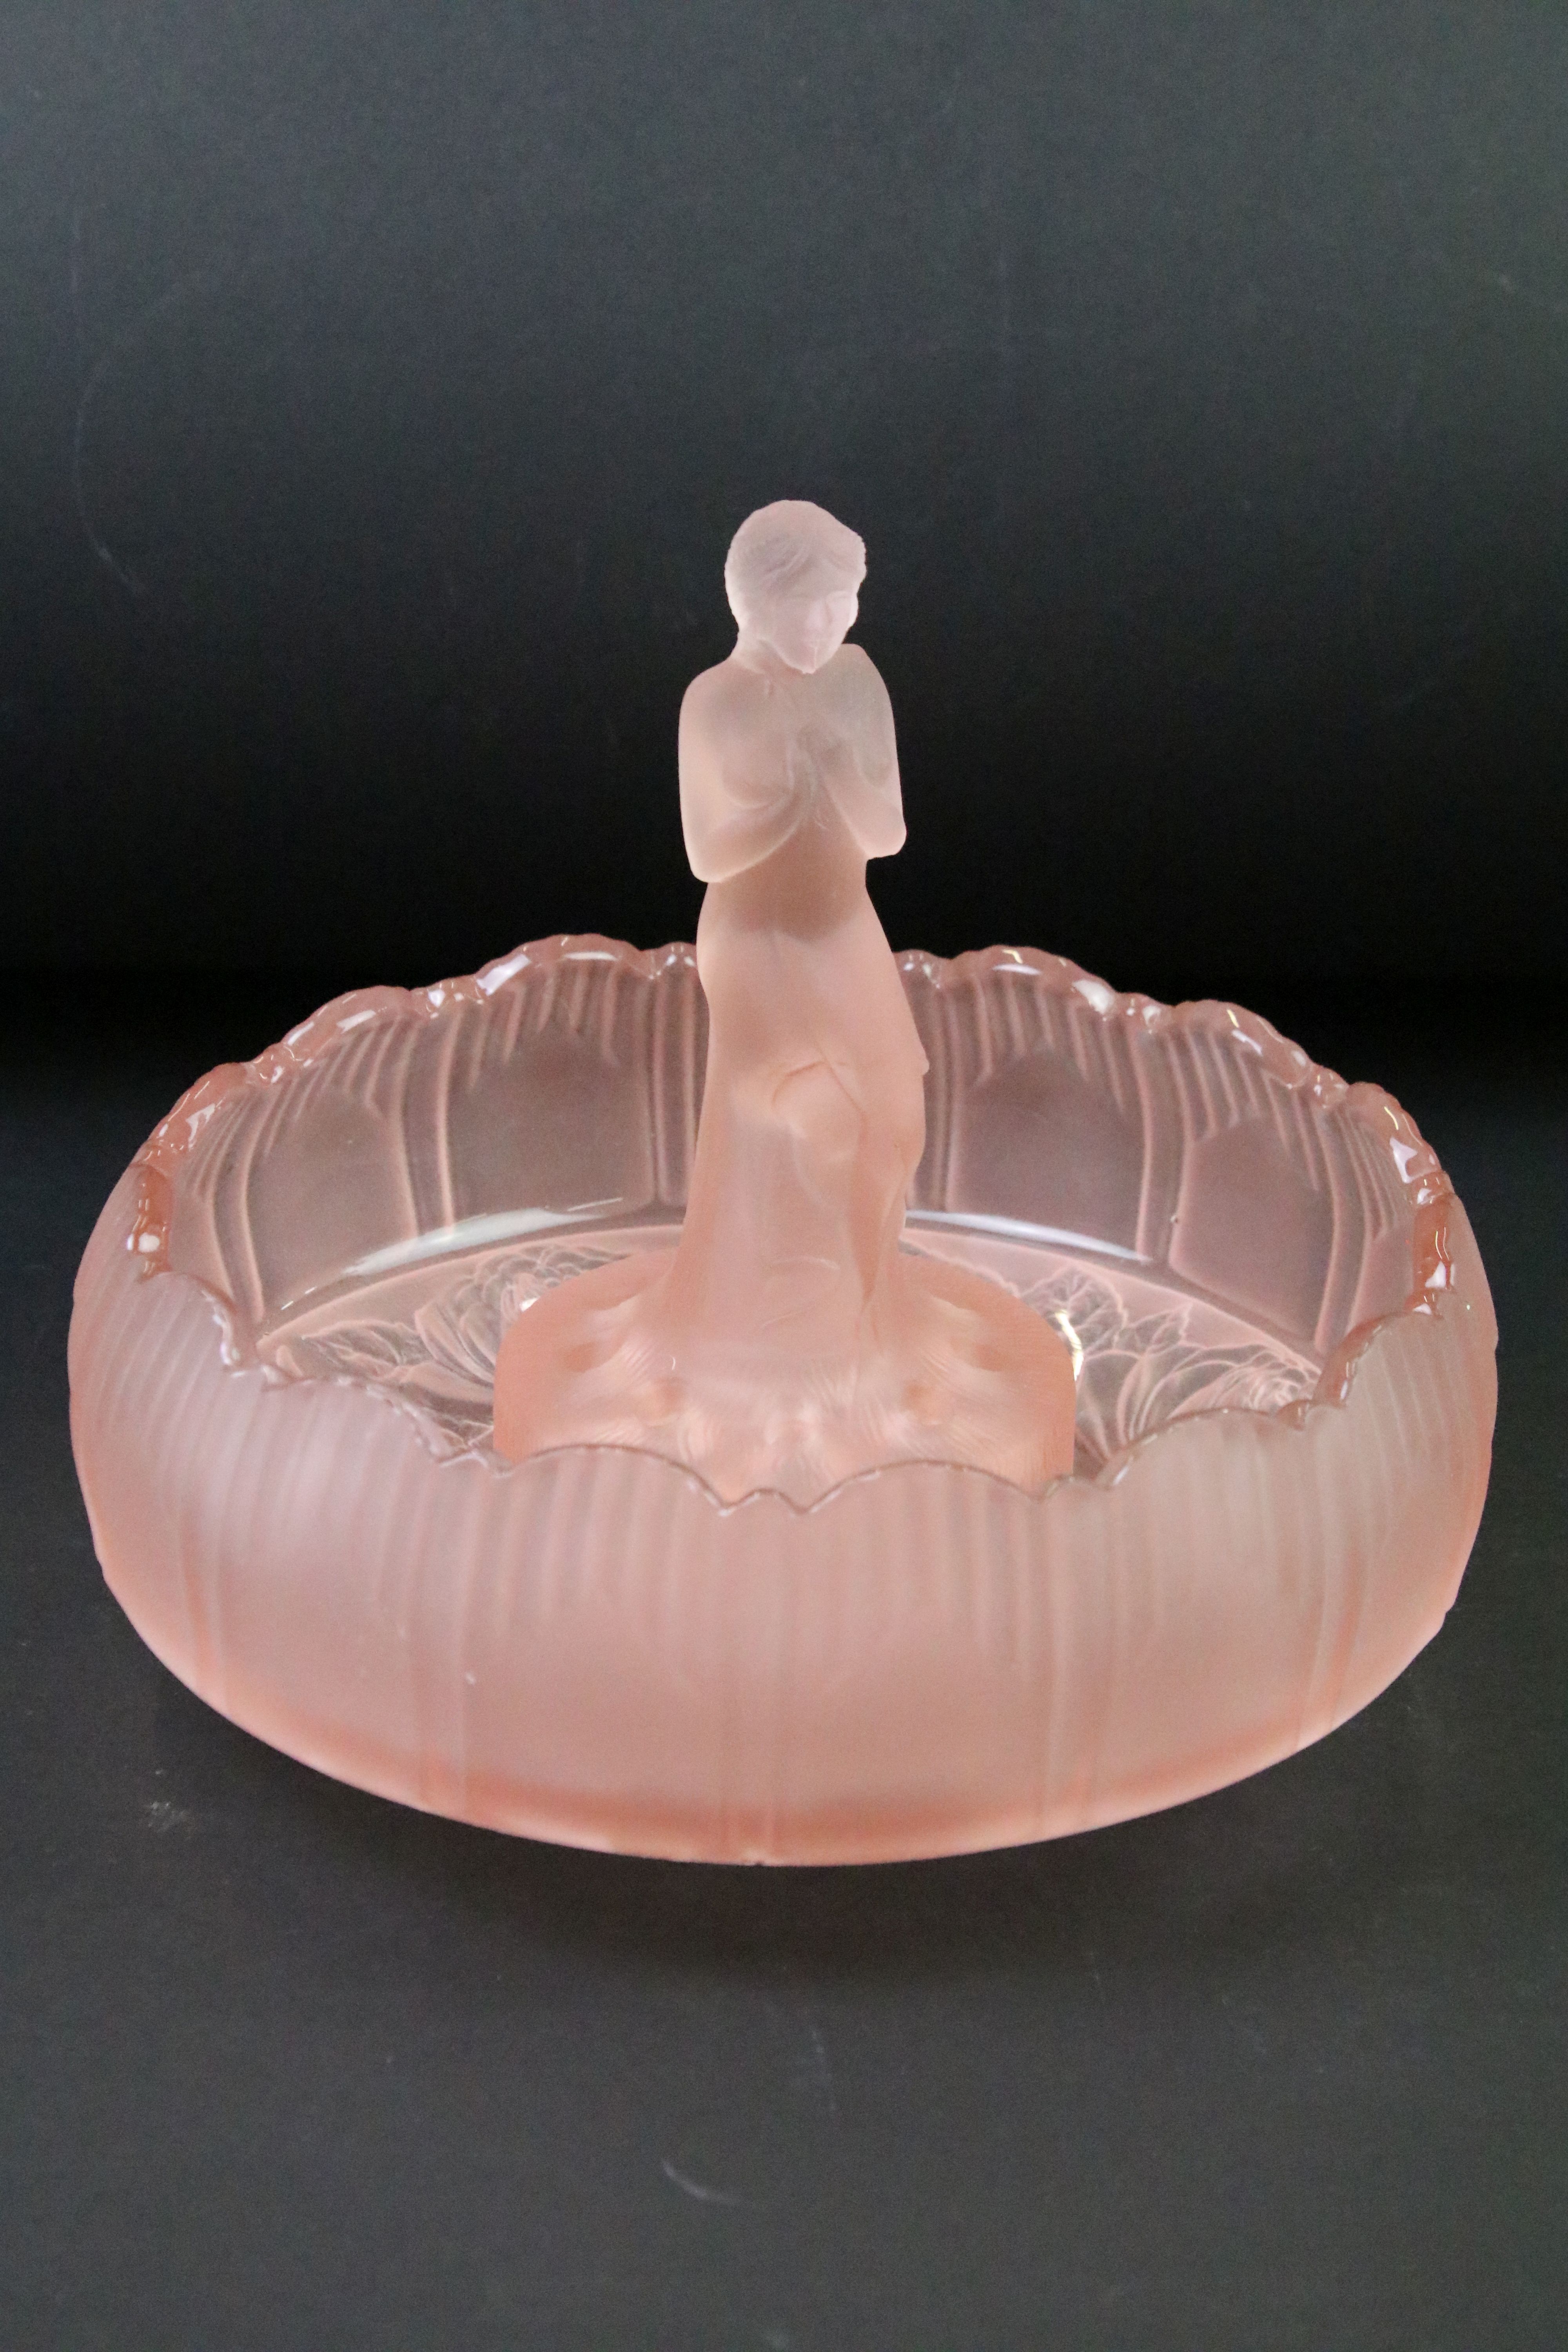 Two Sowerby rose / flower bowls with lady flower frog, one being frosted pink glass, the other clear - Image 7 of 9